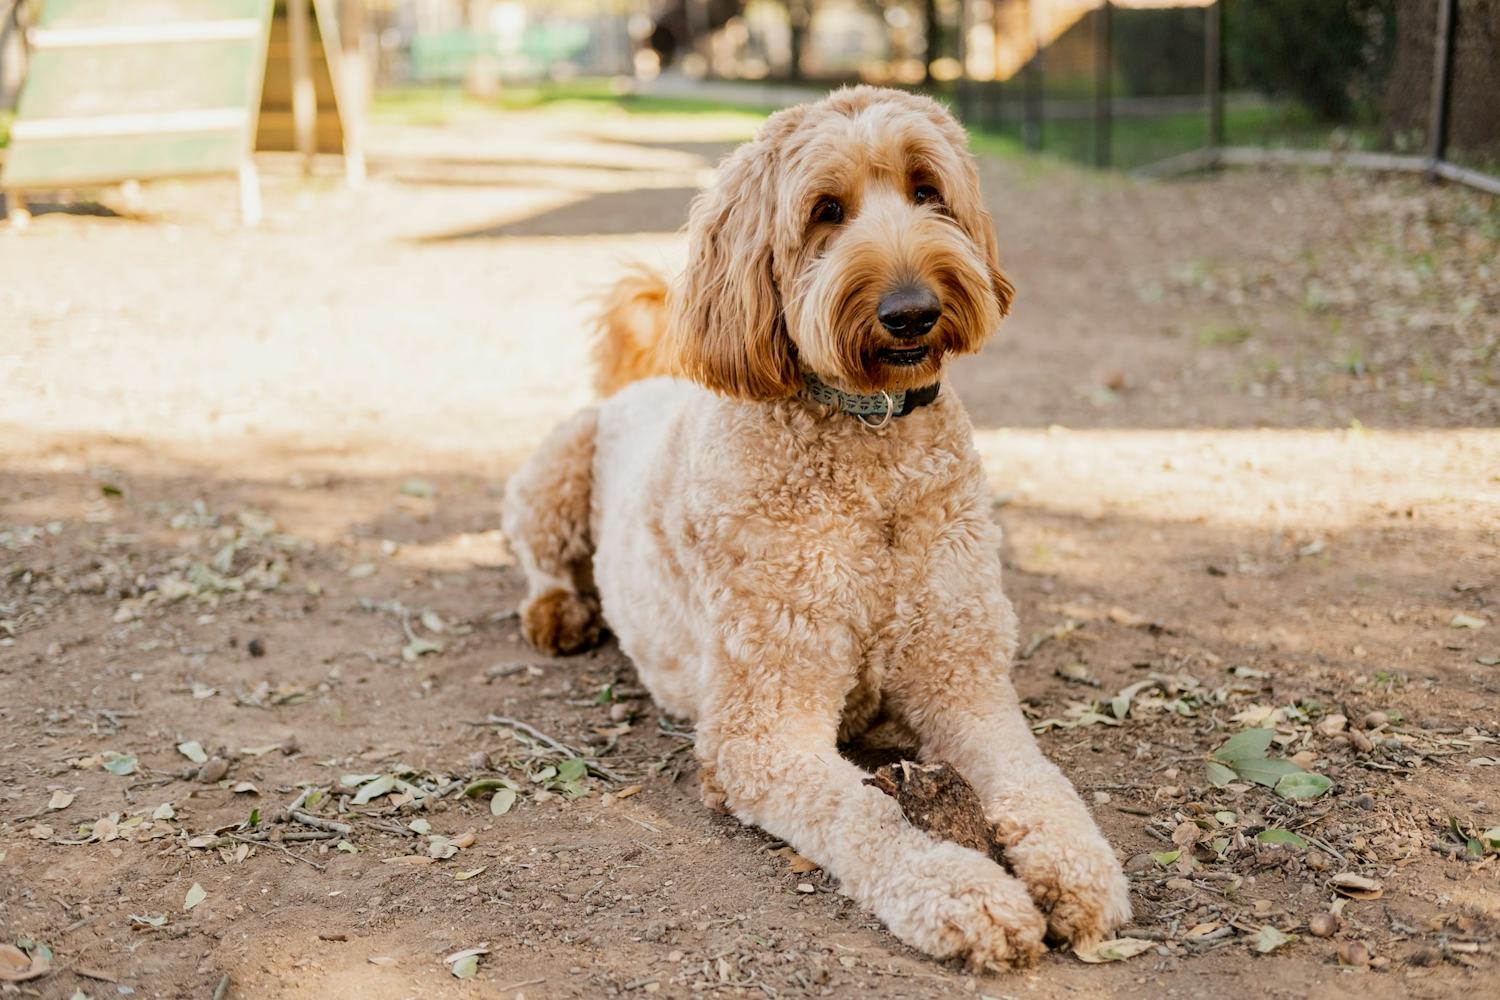 Secondary image of Goldendoodle dog breed